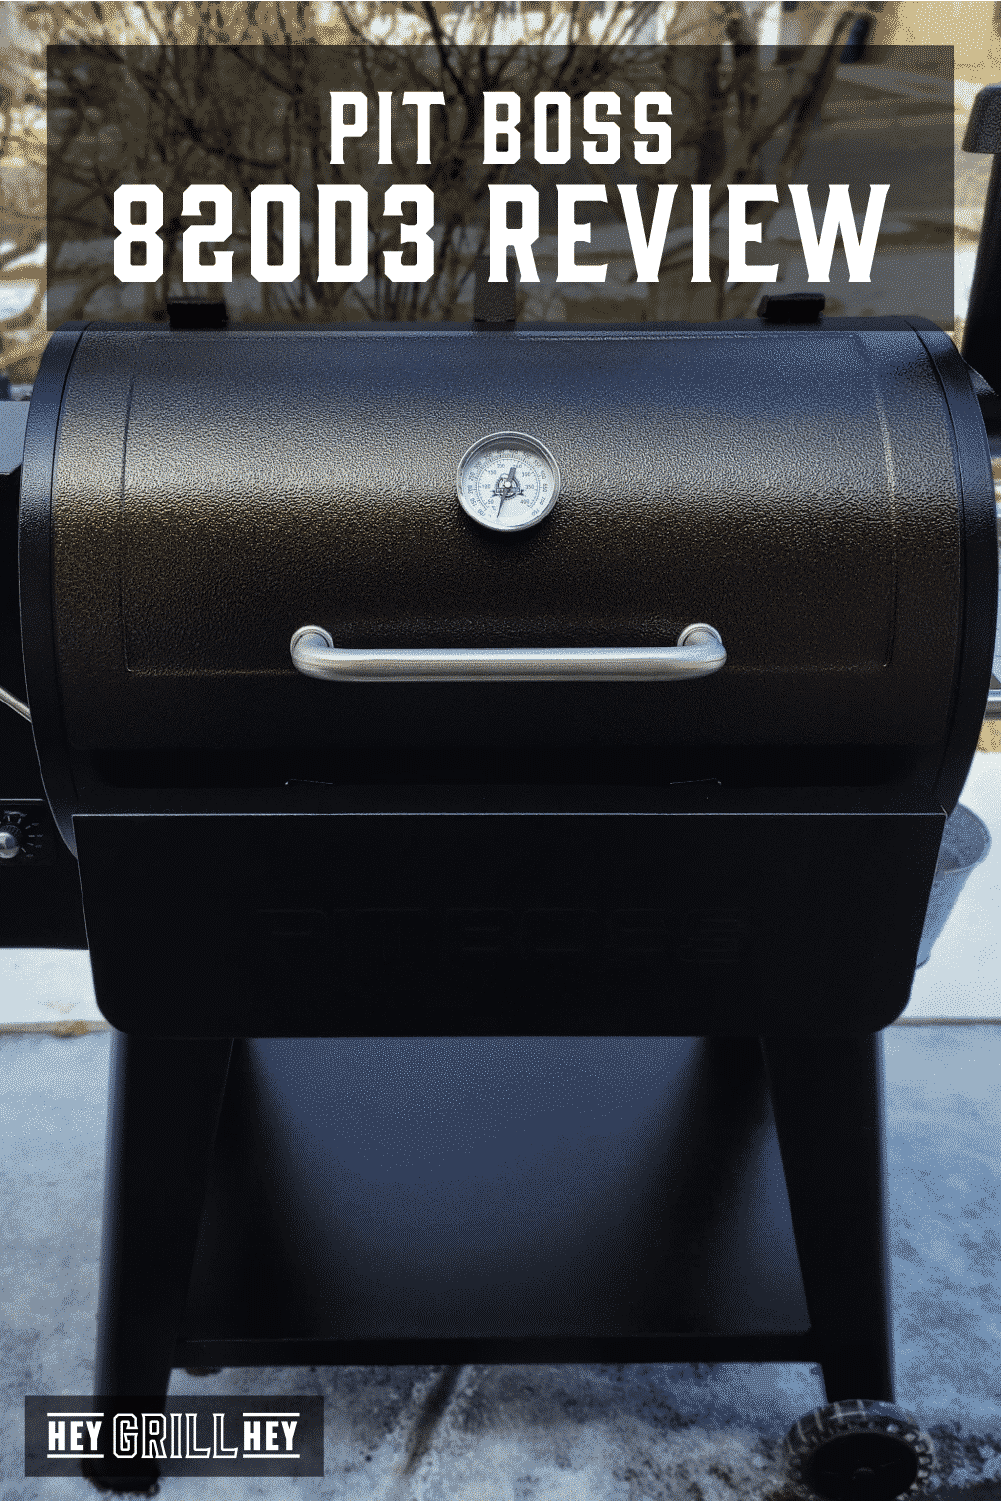 https://heygrillhey.com/wp-content/uploads/2022/04/Pit-Boss-820D3-Review.png